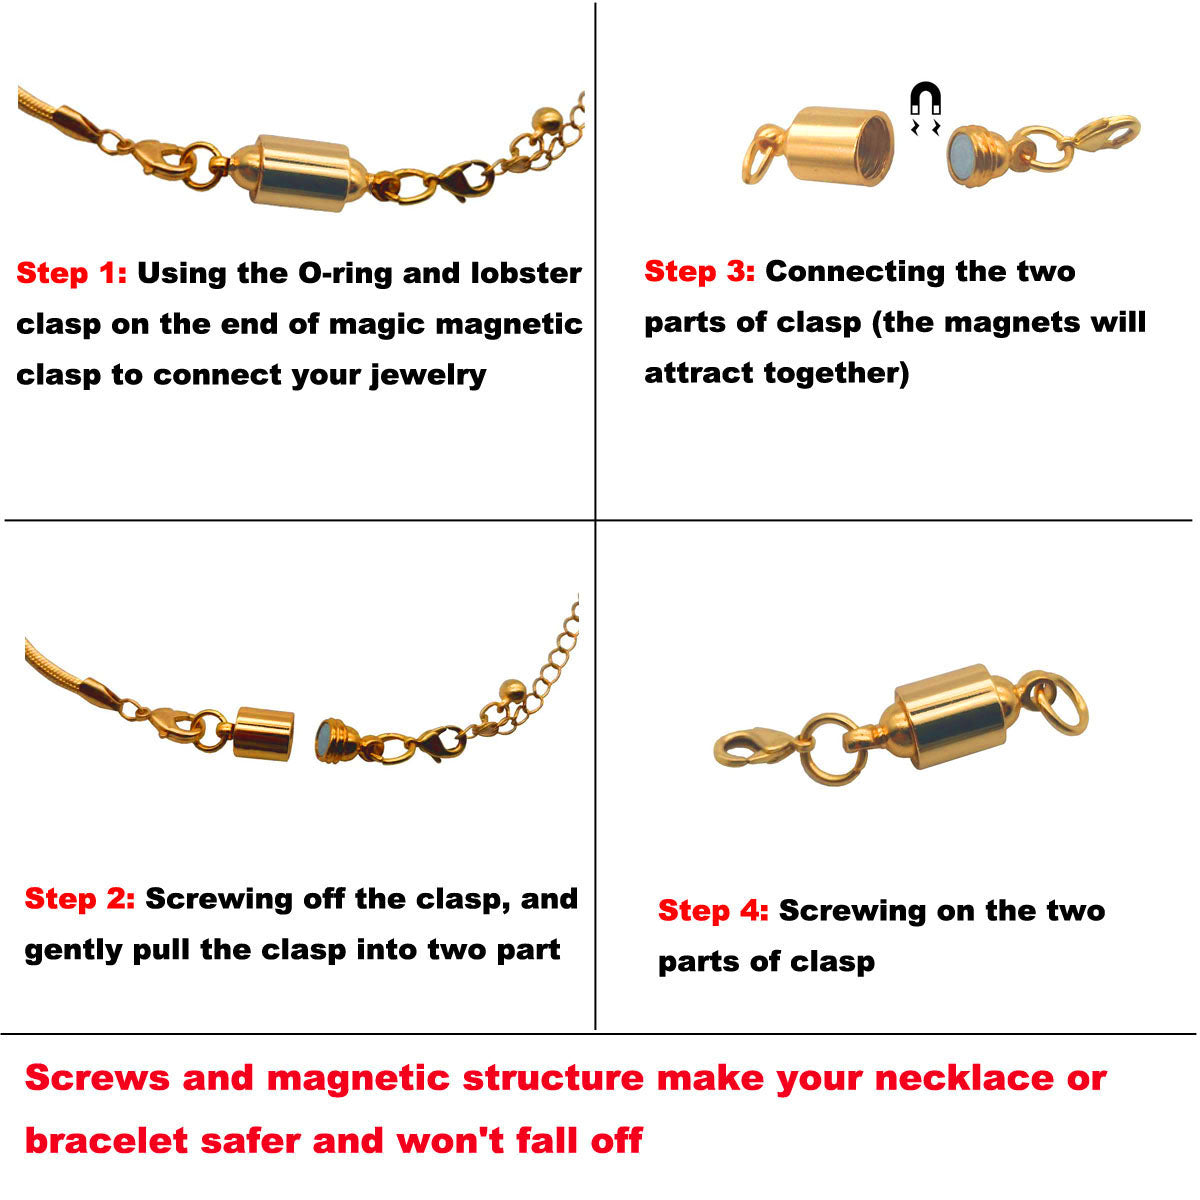 8 Pieces Magnetic Jewelry Clasps For Necklace Closures Screw Locking N…